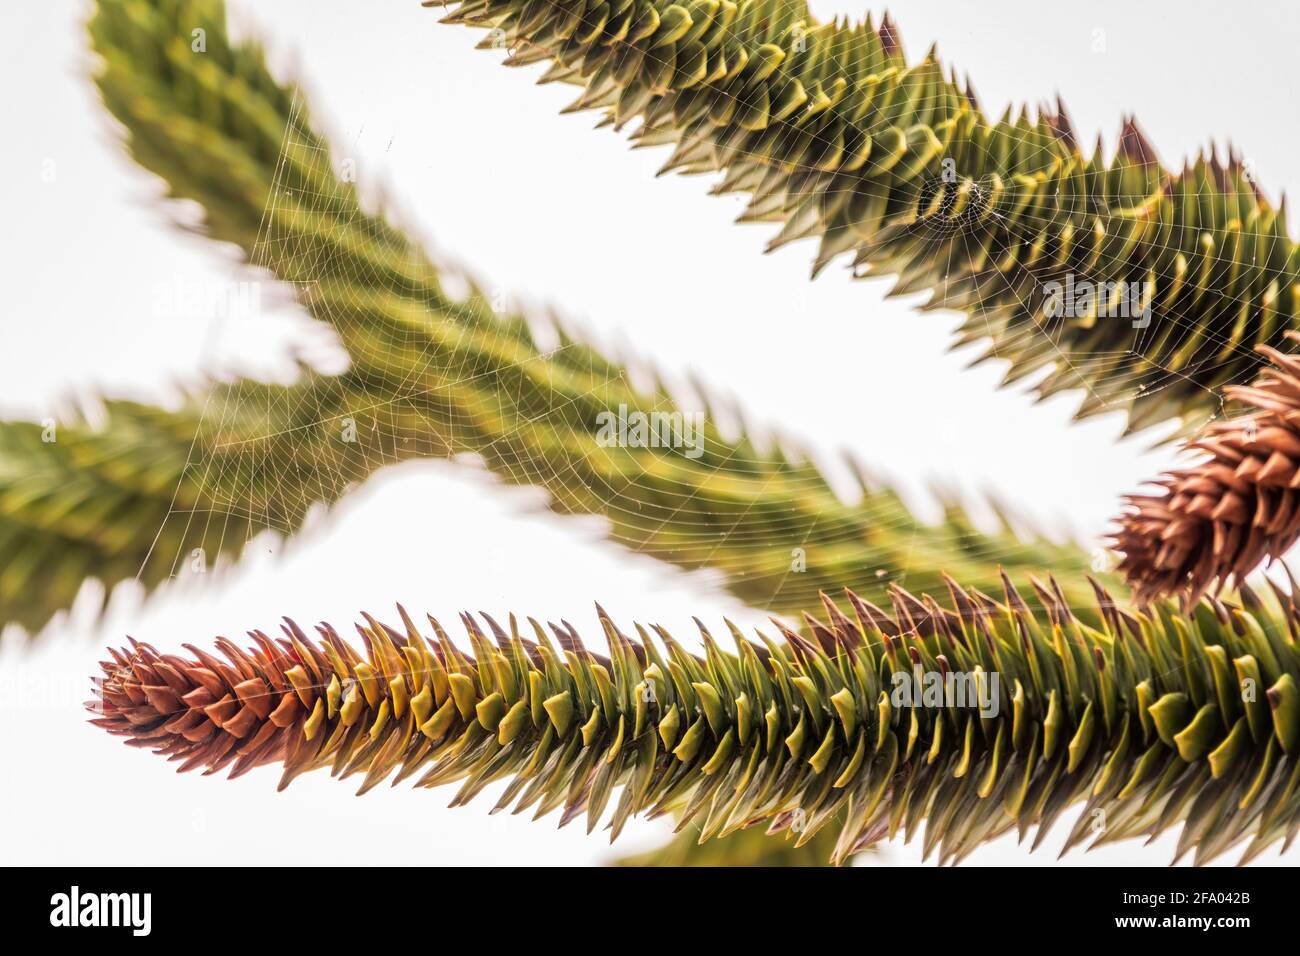 Needles of evergreen tree Araucaria araucana,commonly called the Monkey Puzzle Tree, Monkey Tail Tree, Pewen or Chilean Pine, isolated on white backgr Stock Photo